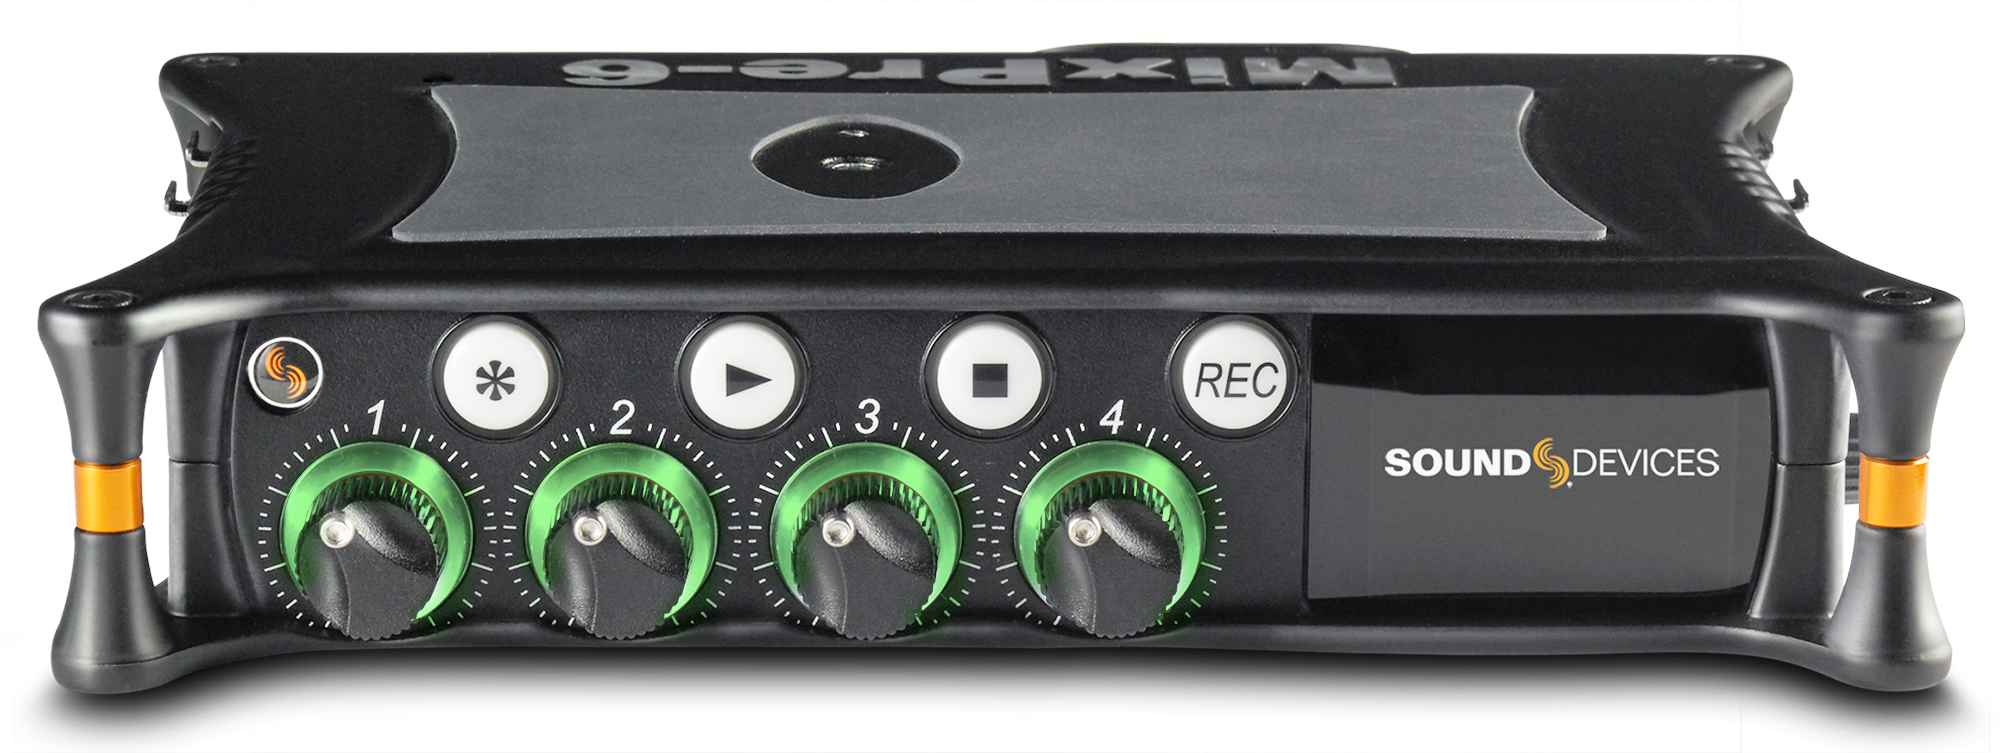 Review: MixPre-3 audio recorder/mixer from Sound Devices 2